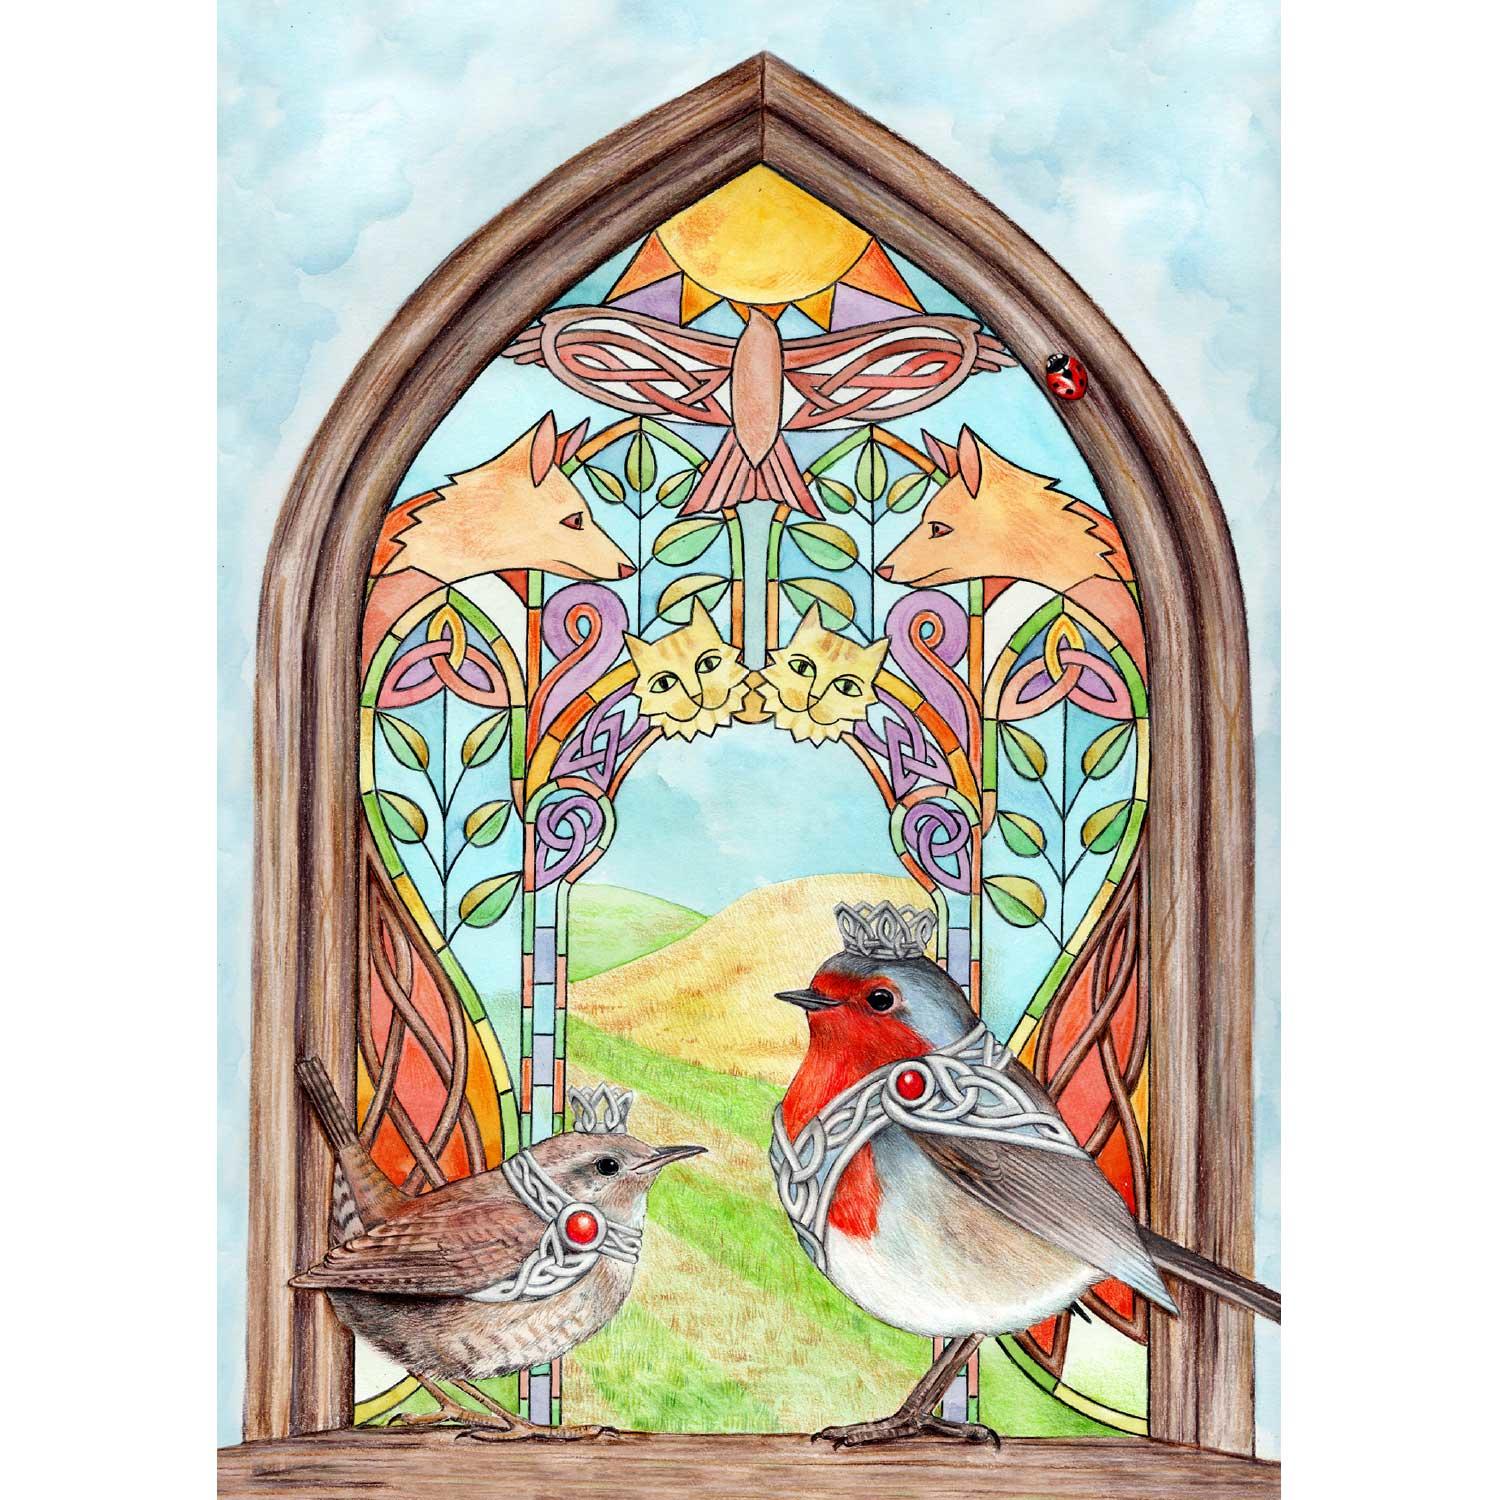 Robin and Wren by artist Marjory Tait